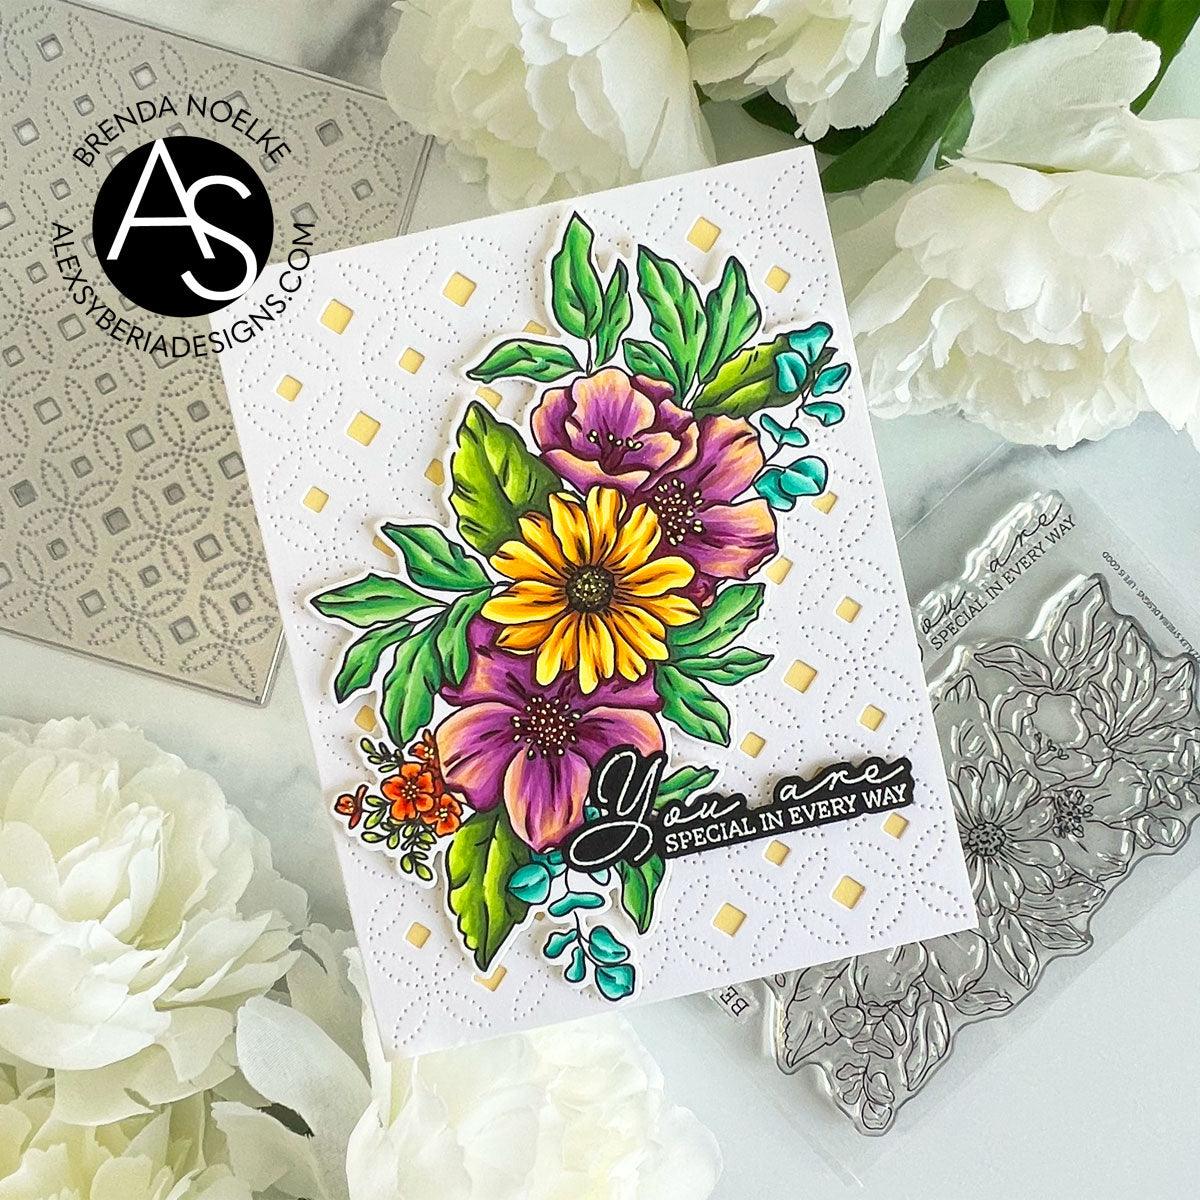 life-is-good-stamp-set-alex-syberia-designs-bouquet-coloring-cardmaking-tutorial-floral-card-famous-cardmaking-brands-copic-coloring-handmadecards